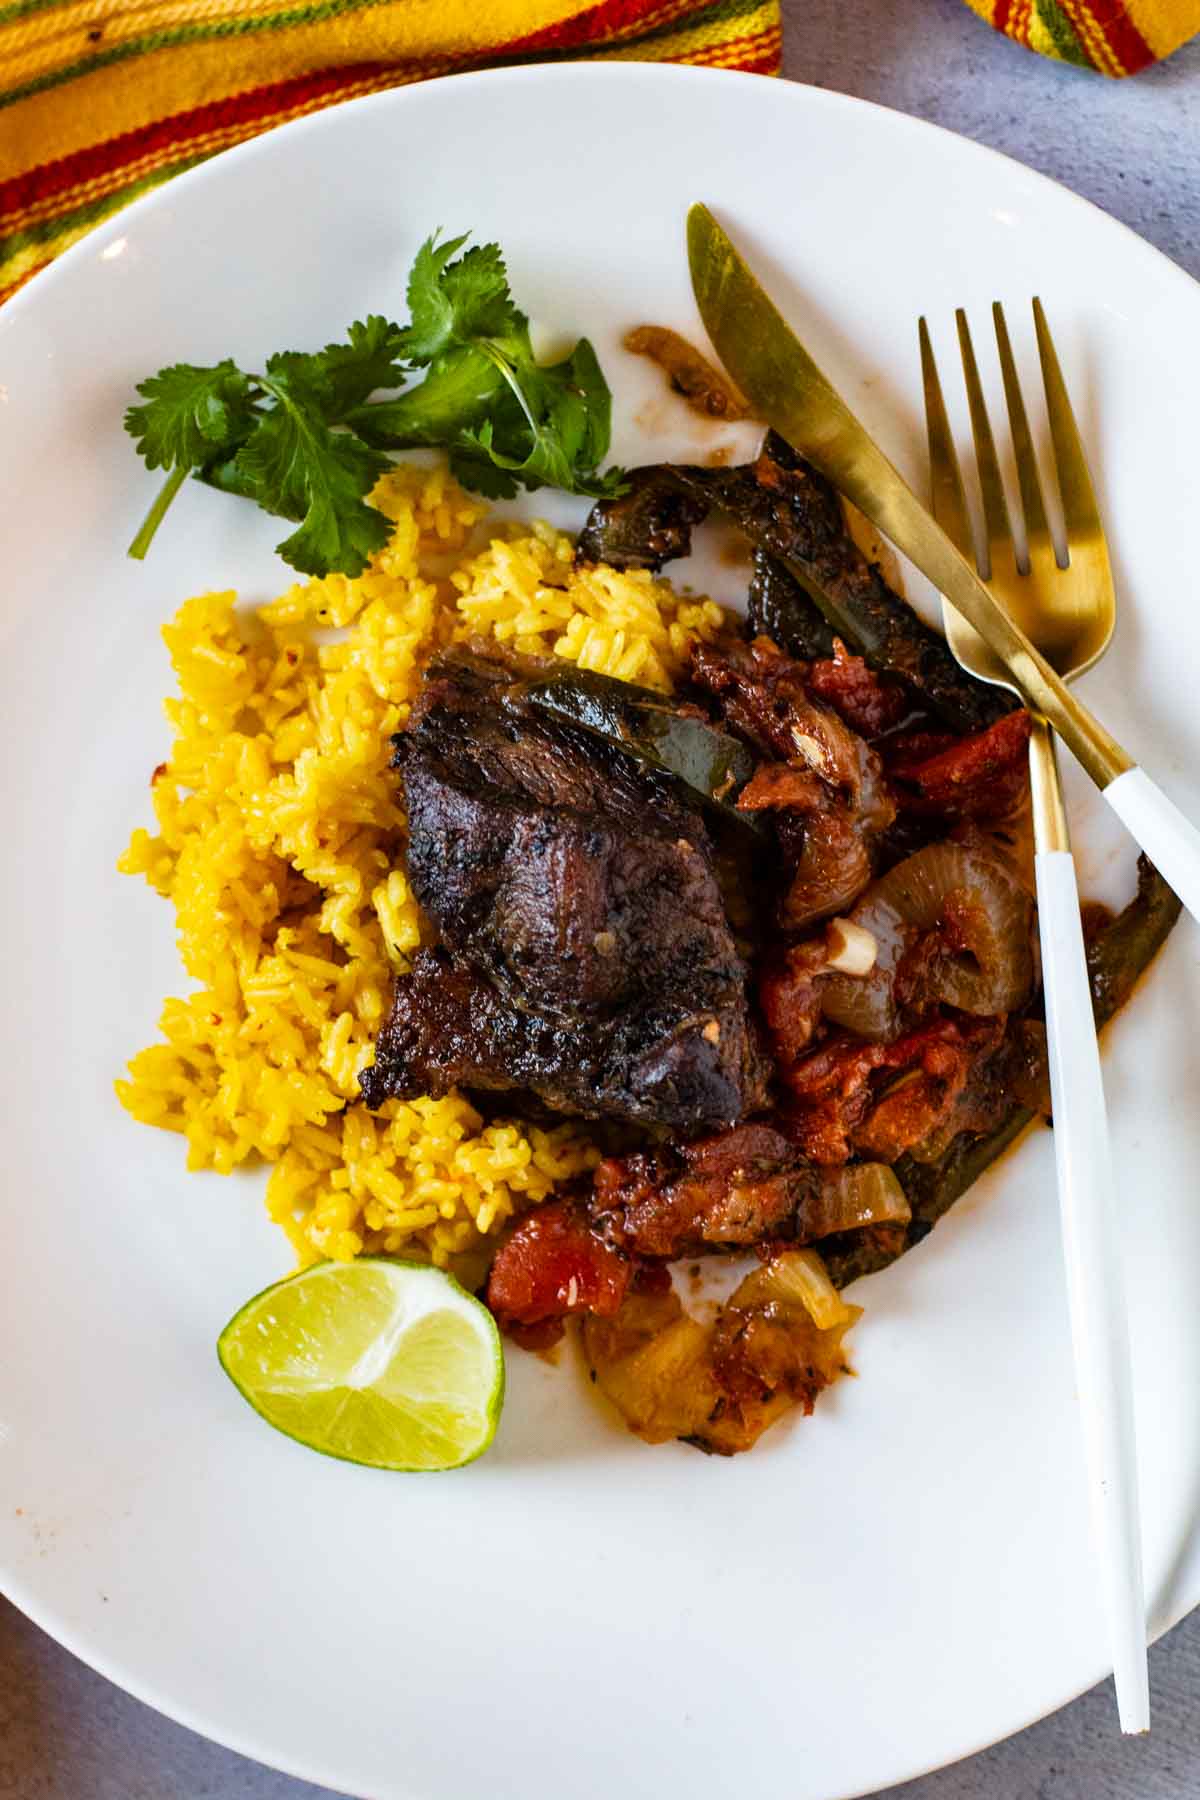 Mexican Short Ribs served over yellow rice.